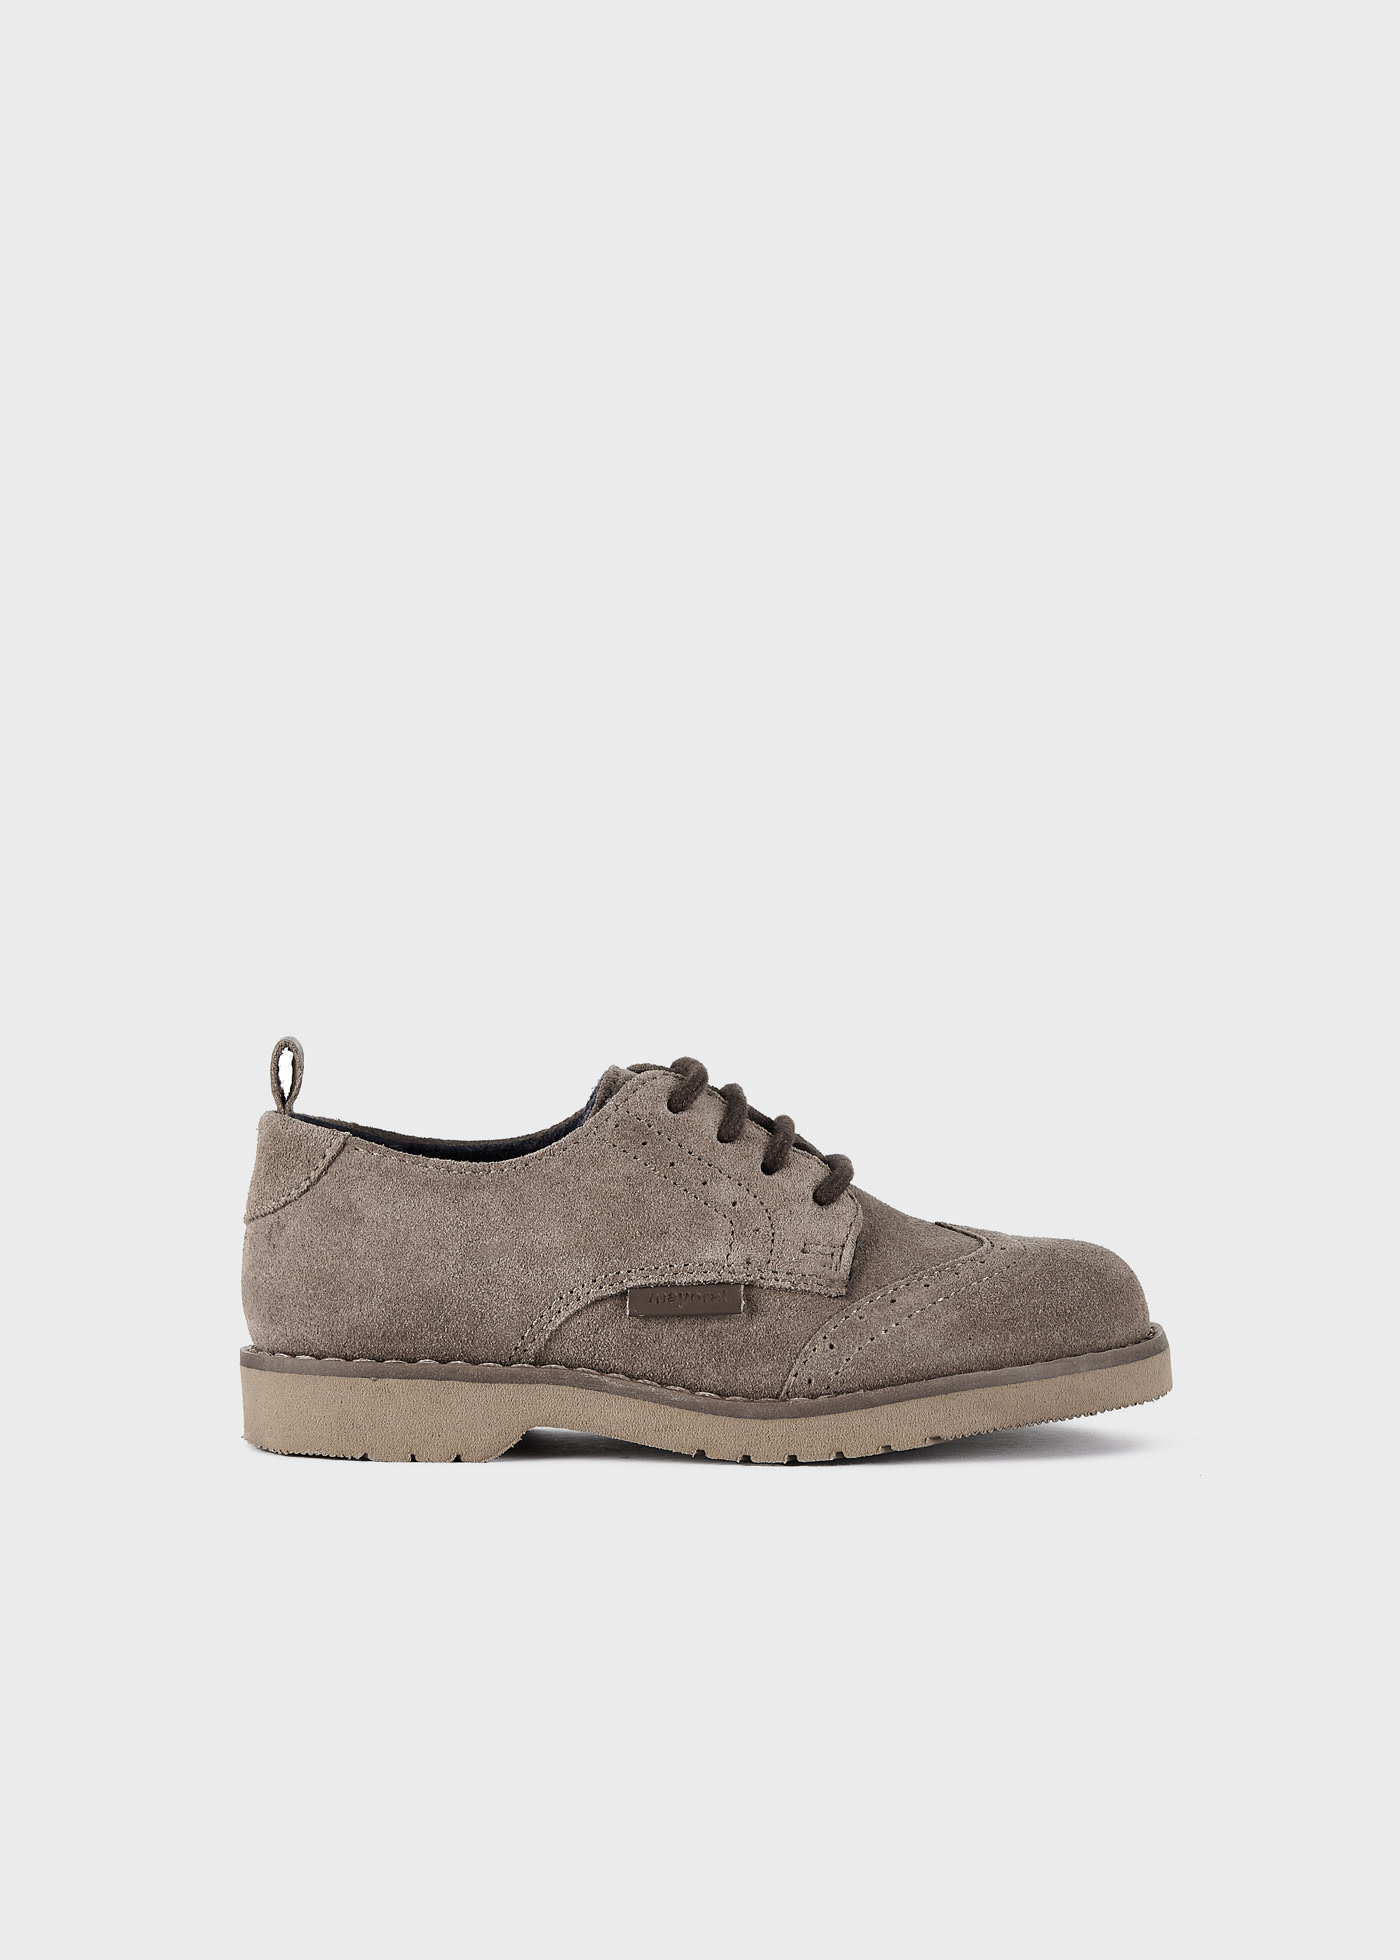 Boy Oxford leather shoes